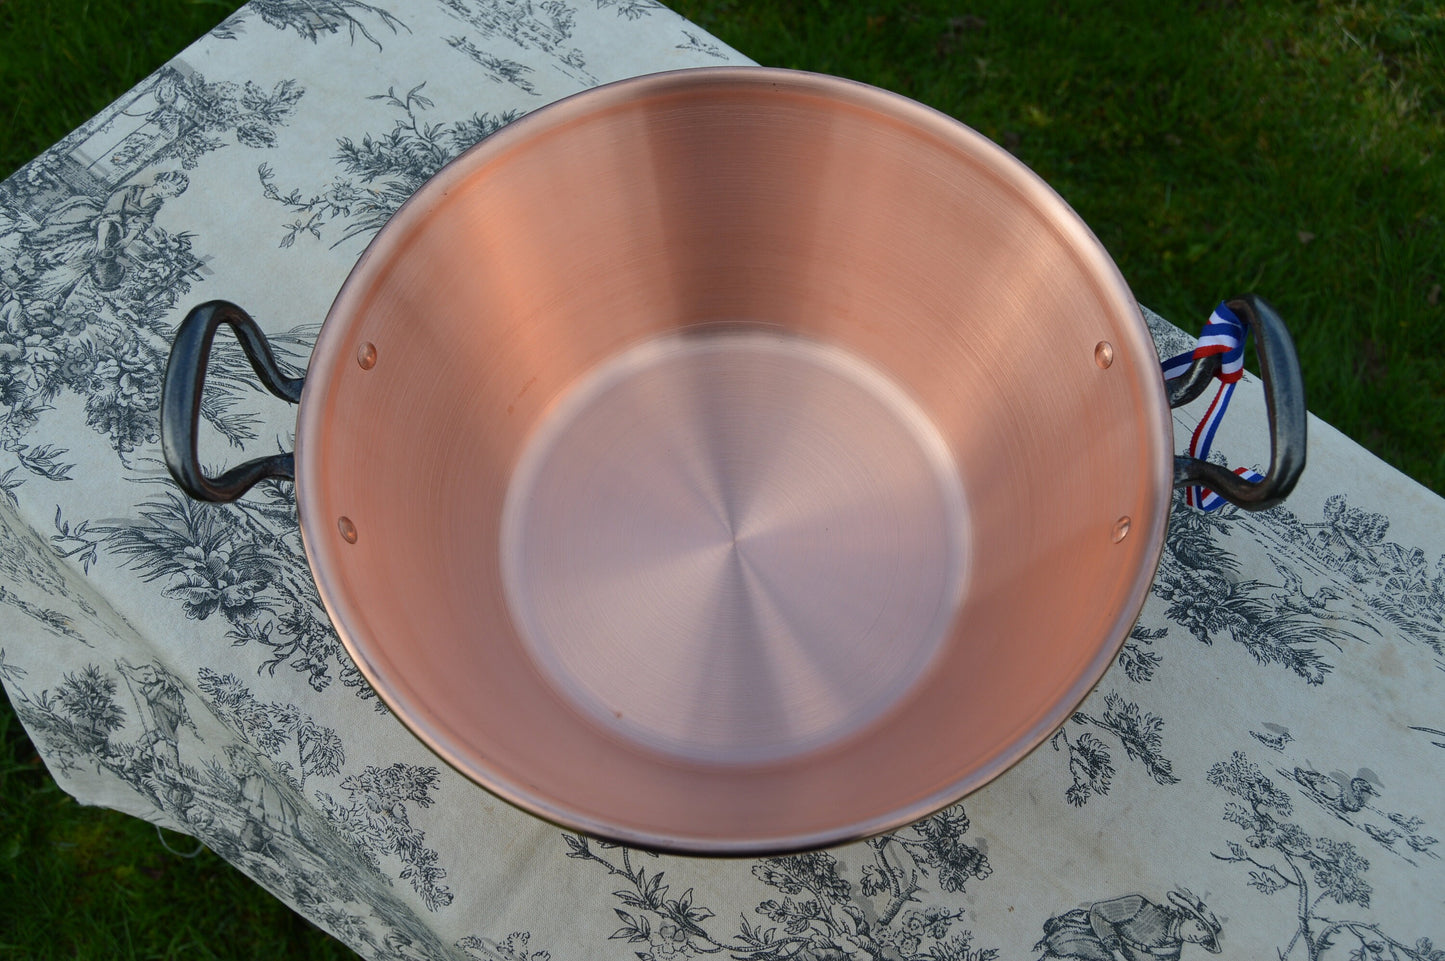 New NKC 28 cm Copper Jam Pan from Normandy Kitchen Copper Jam Jelly Pan 28cm 11" Rolled Top Iron Handles New Normandy Kitchen Copper